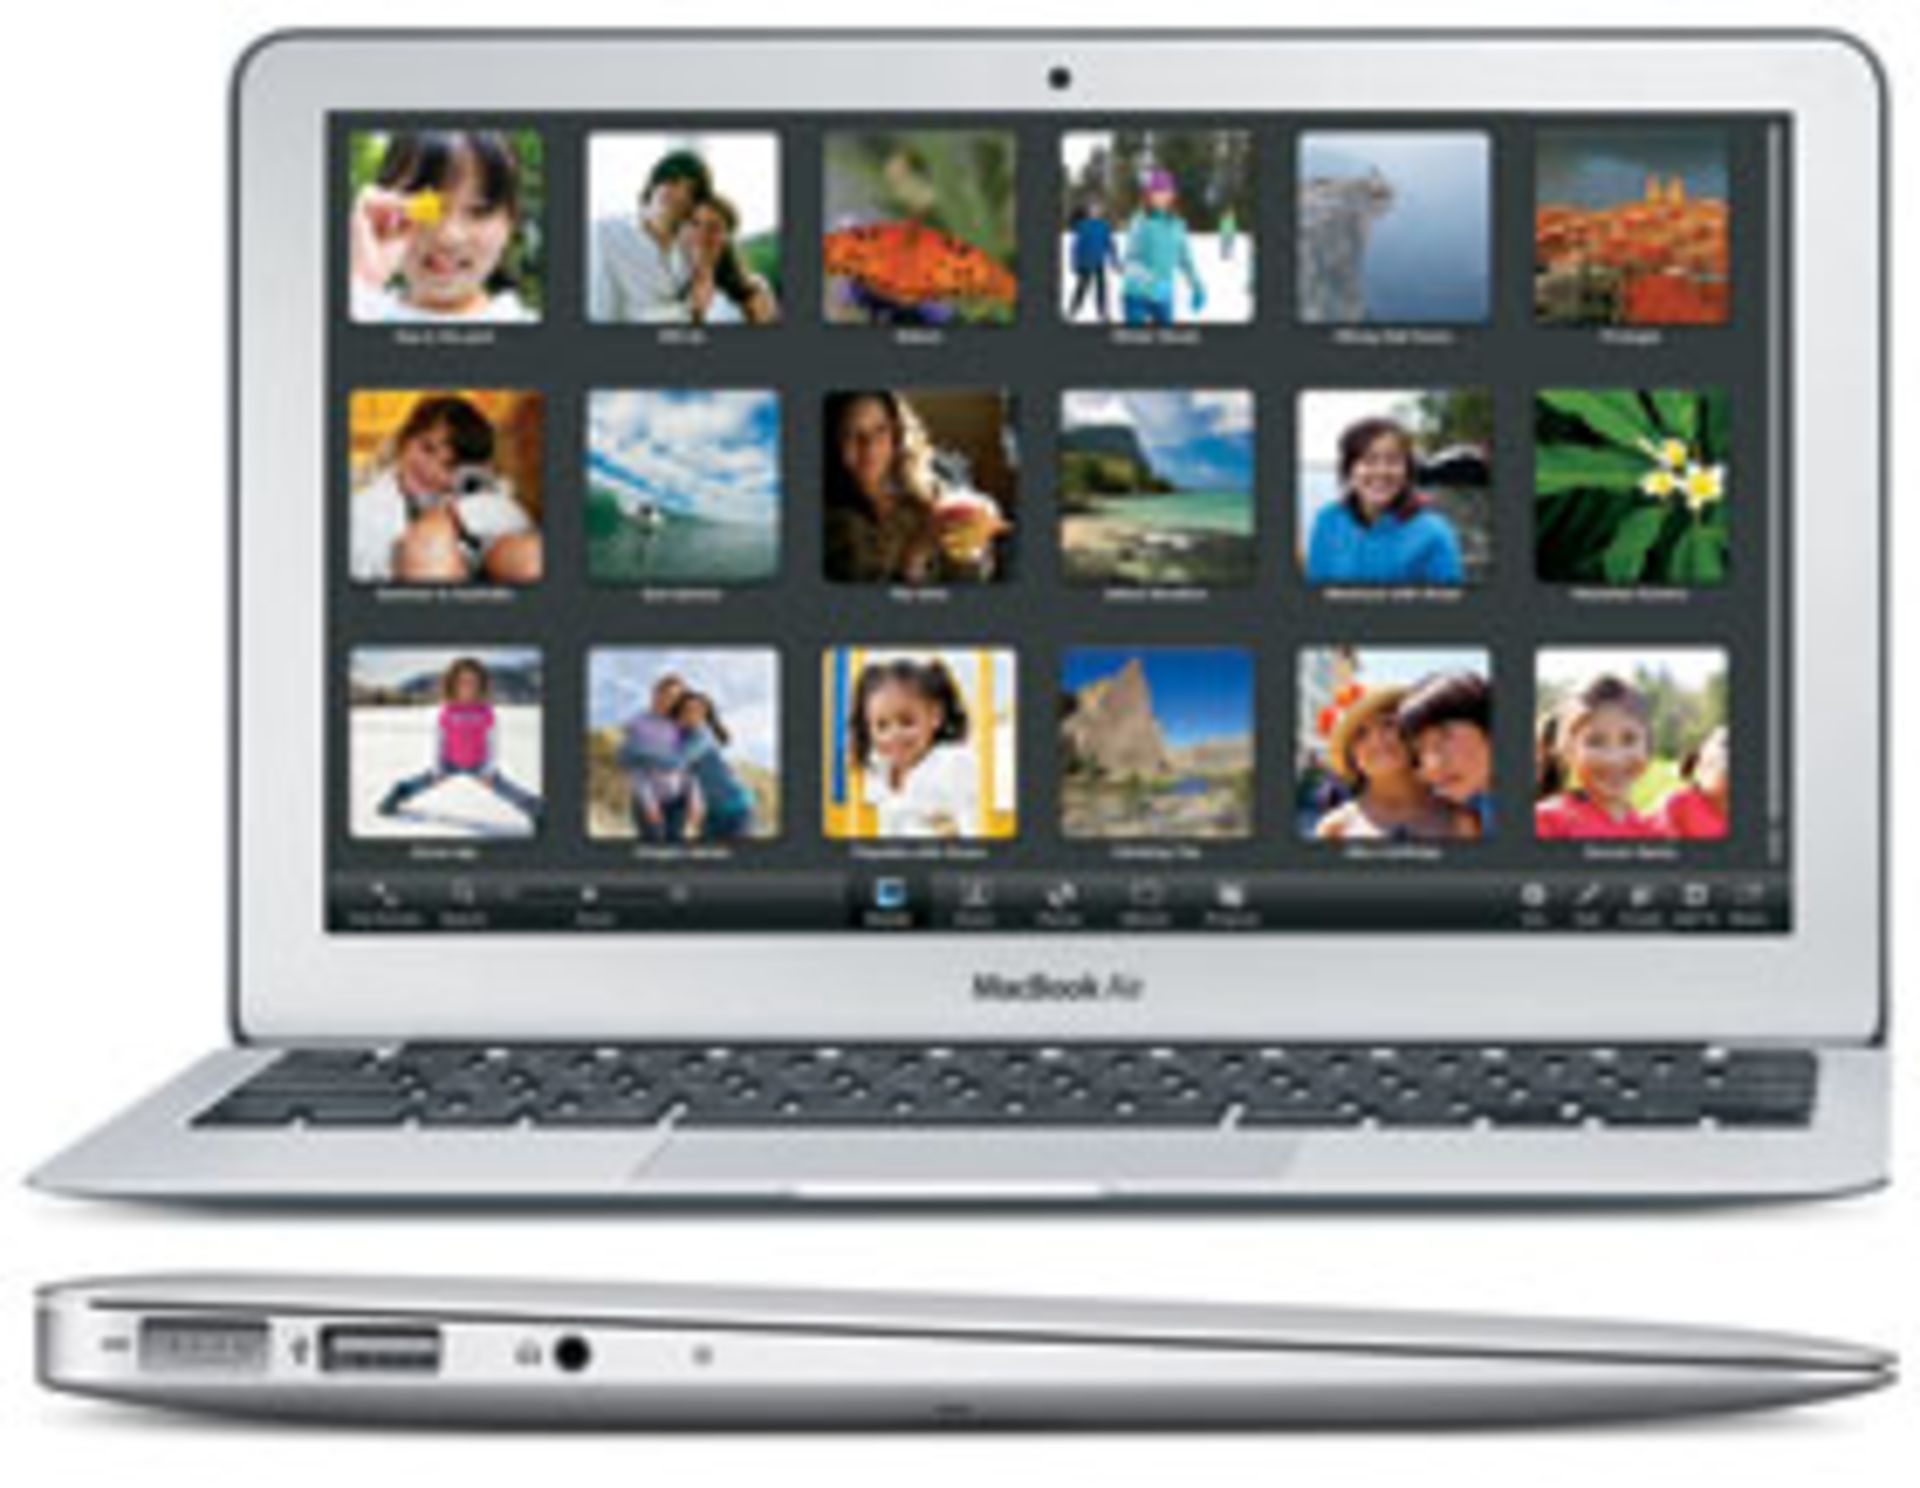 V Grade B Macbook Air 11.6 Inch Core 2 Duo - 64GB SSD - A1370 - Available Approx 7 Working Days